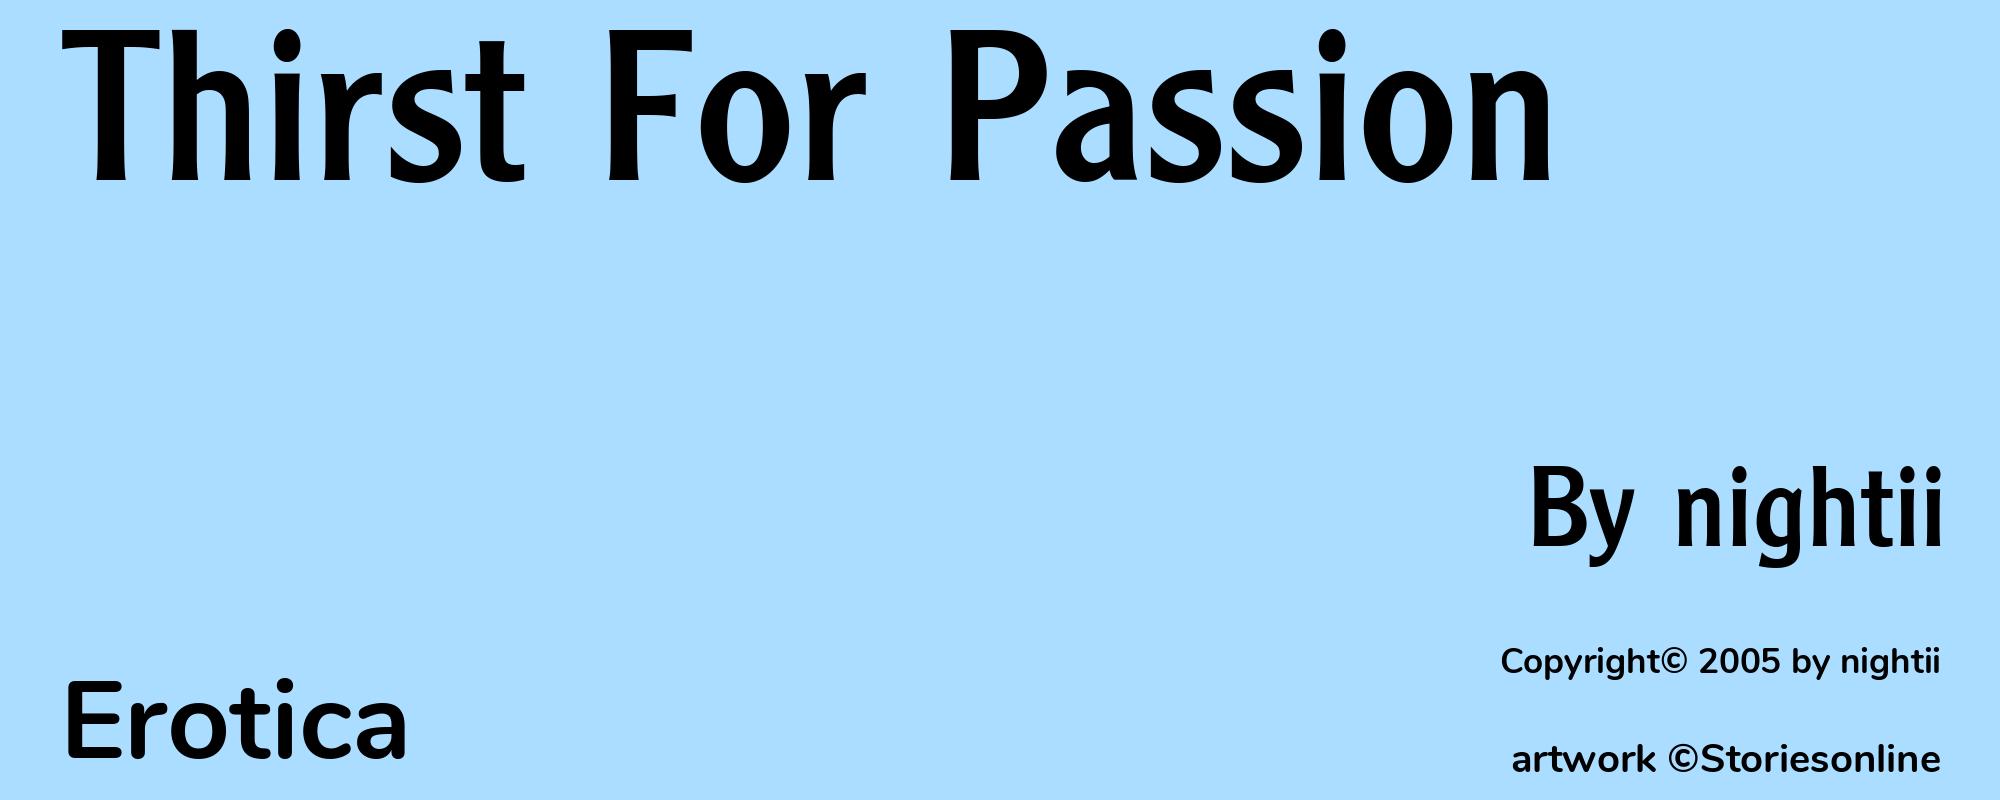 Thirst For Passion - Cover